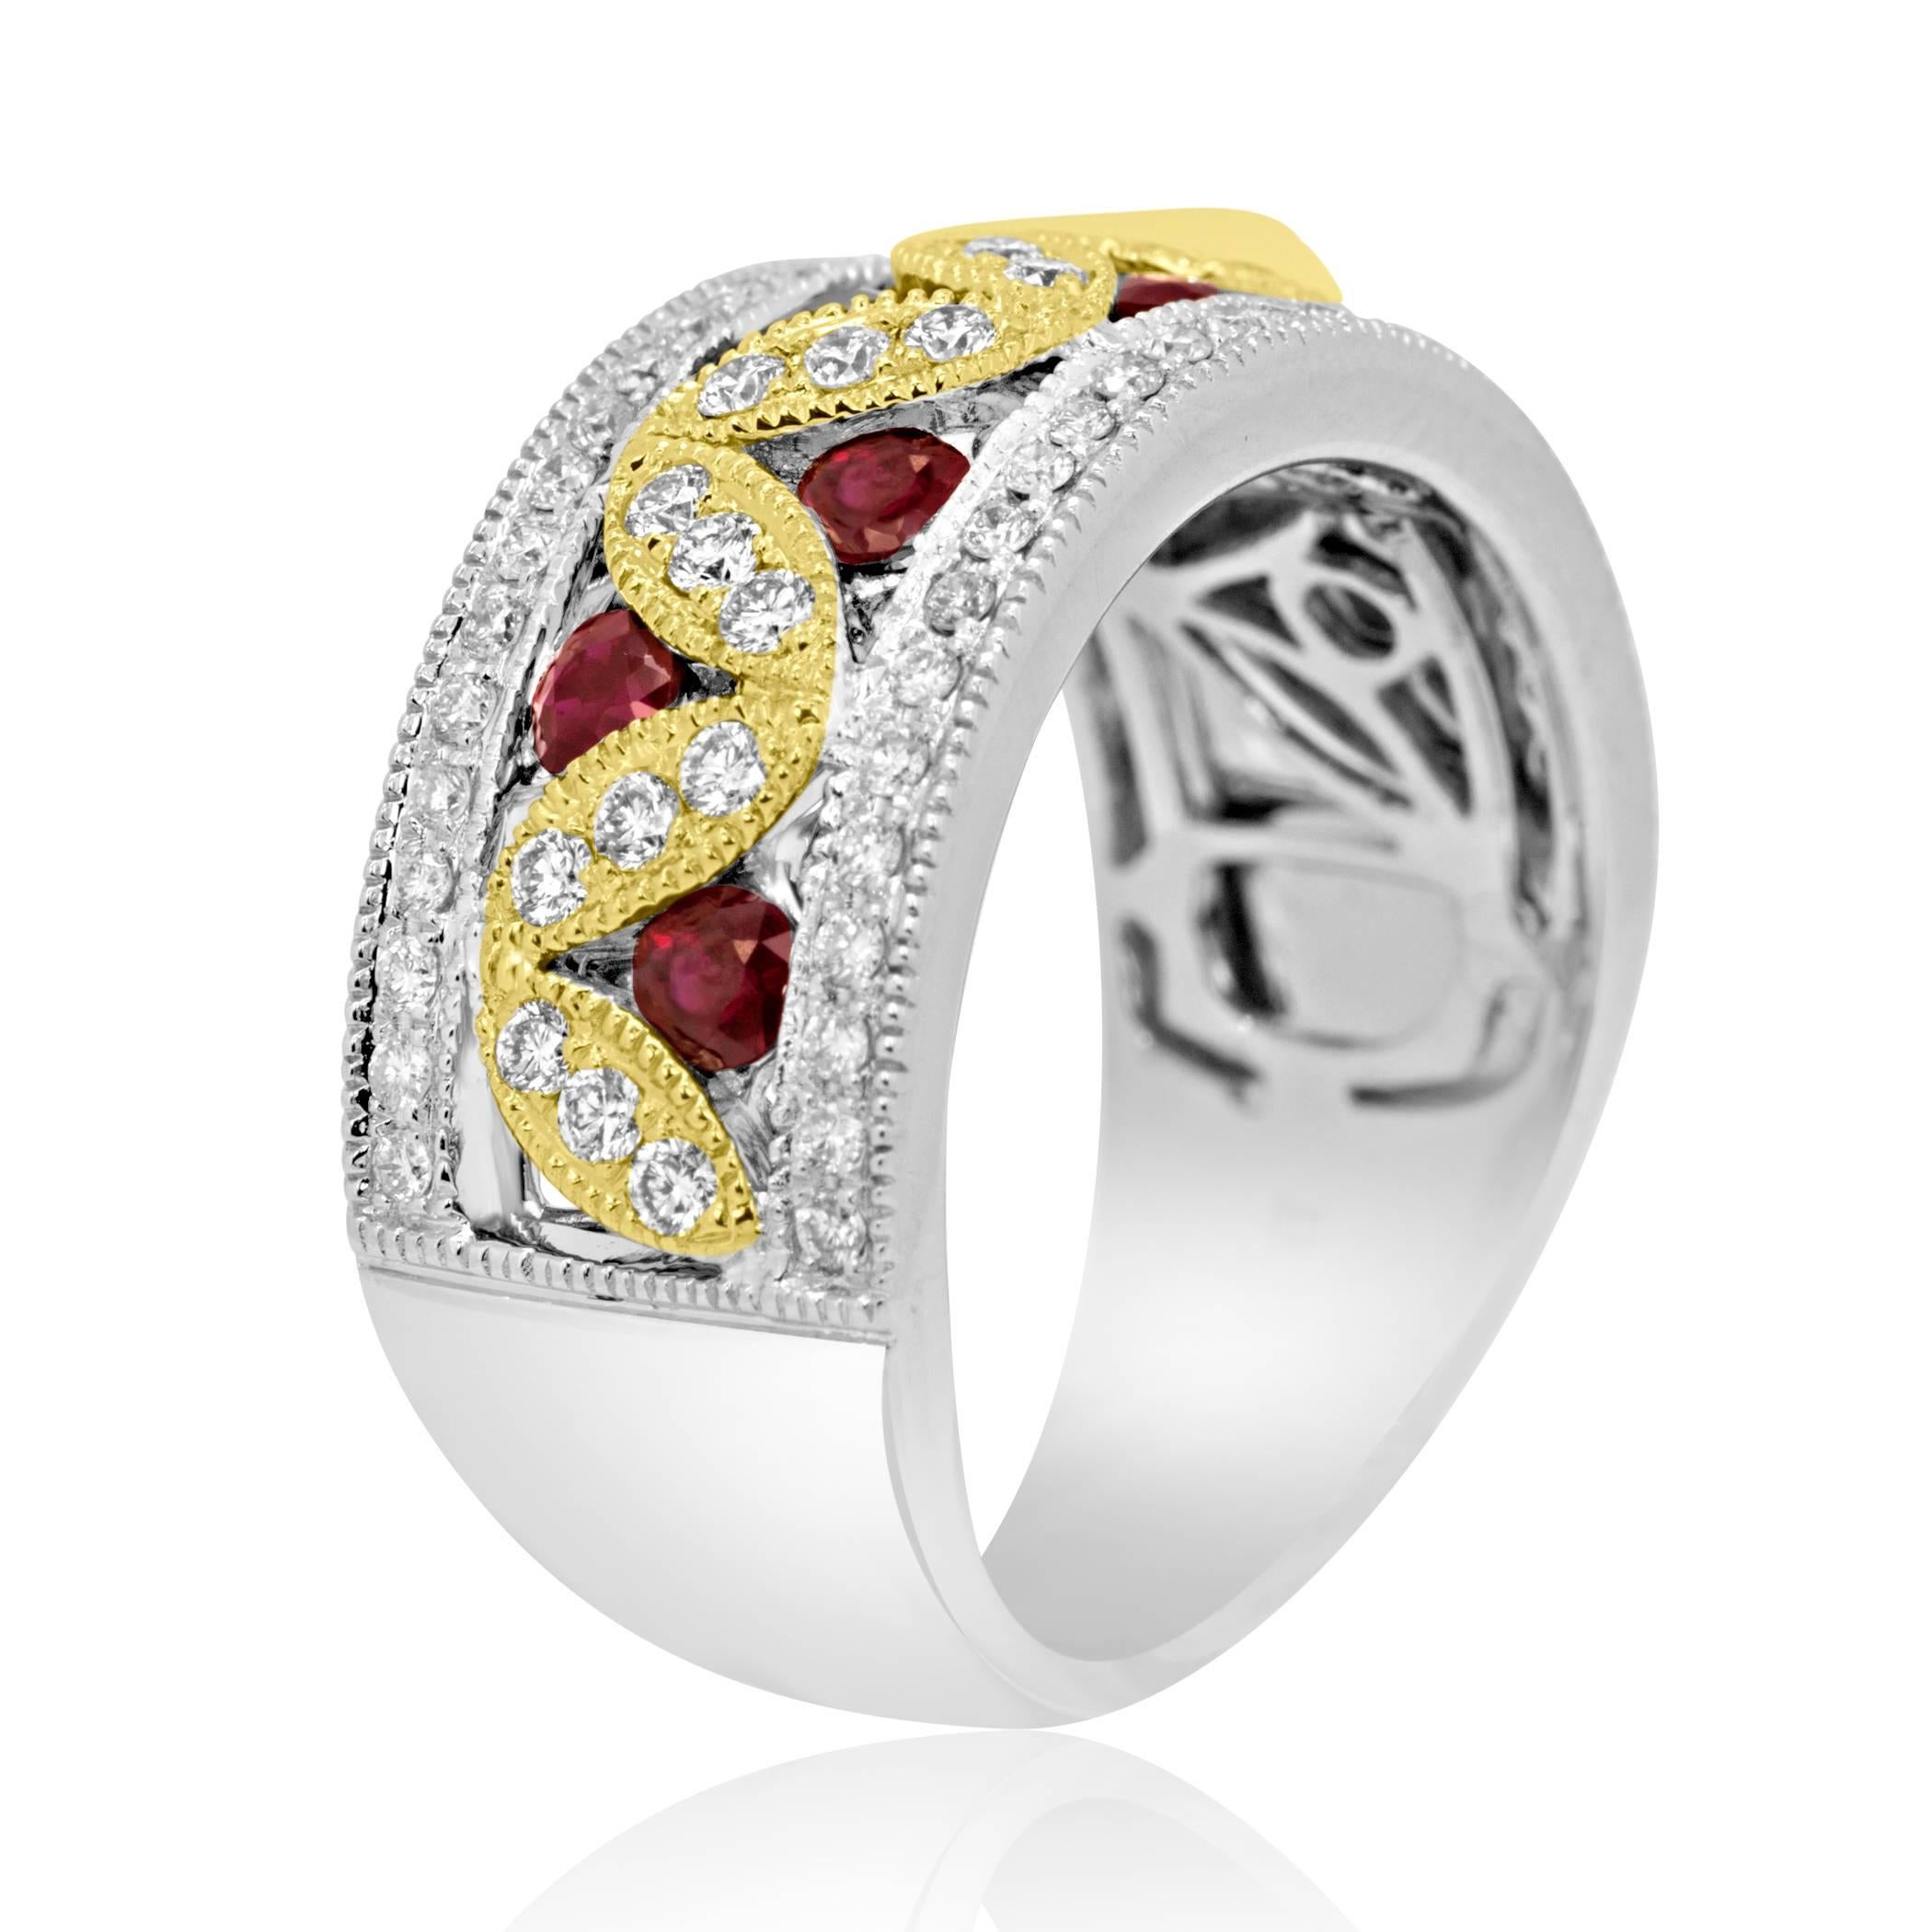 7 Ruby Round 0.66 Carat White diamond Round 0.60 Carat In 14K Yellow and White Gold Fashion Cocktail Band Ring. 
Total Weight 1.26 Carat